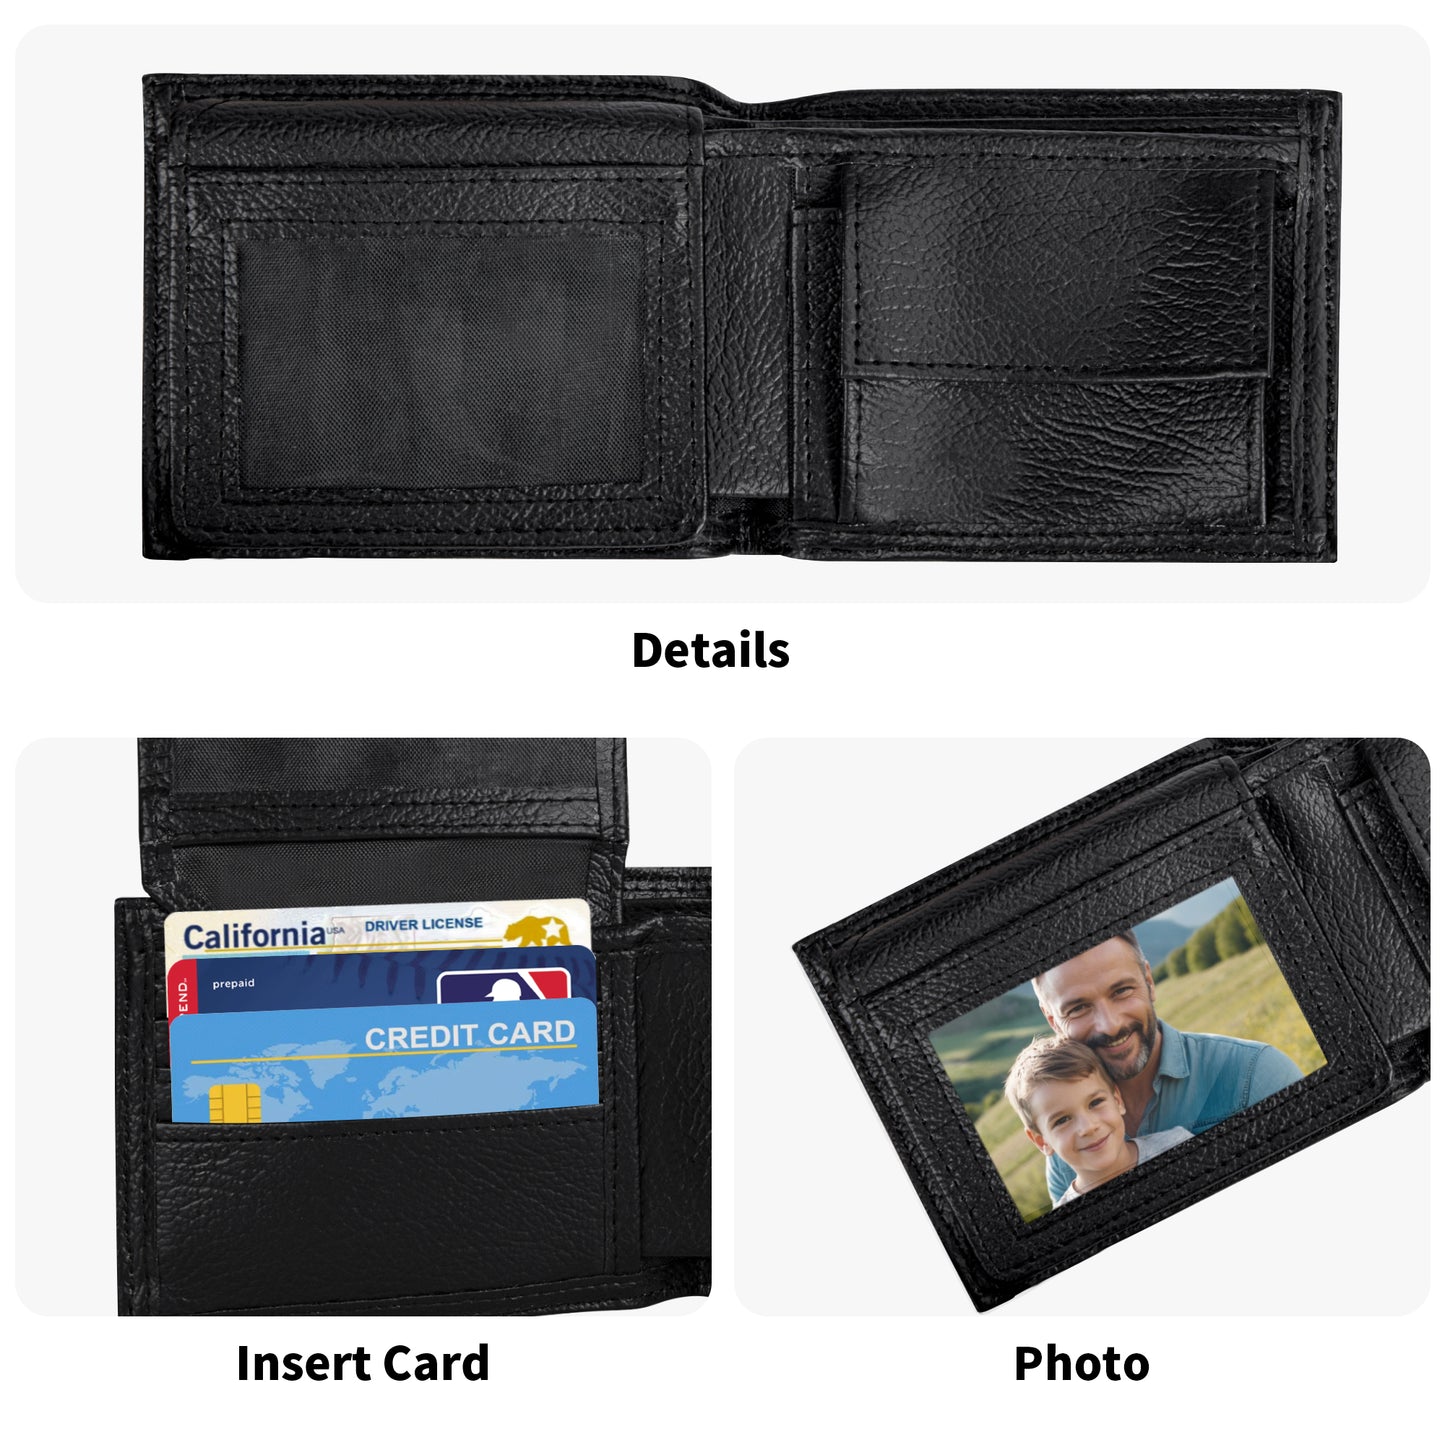 Jesus Gave Me The Victory Mens Minimalist PU Leather Christian Wallet